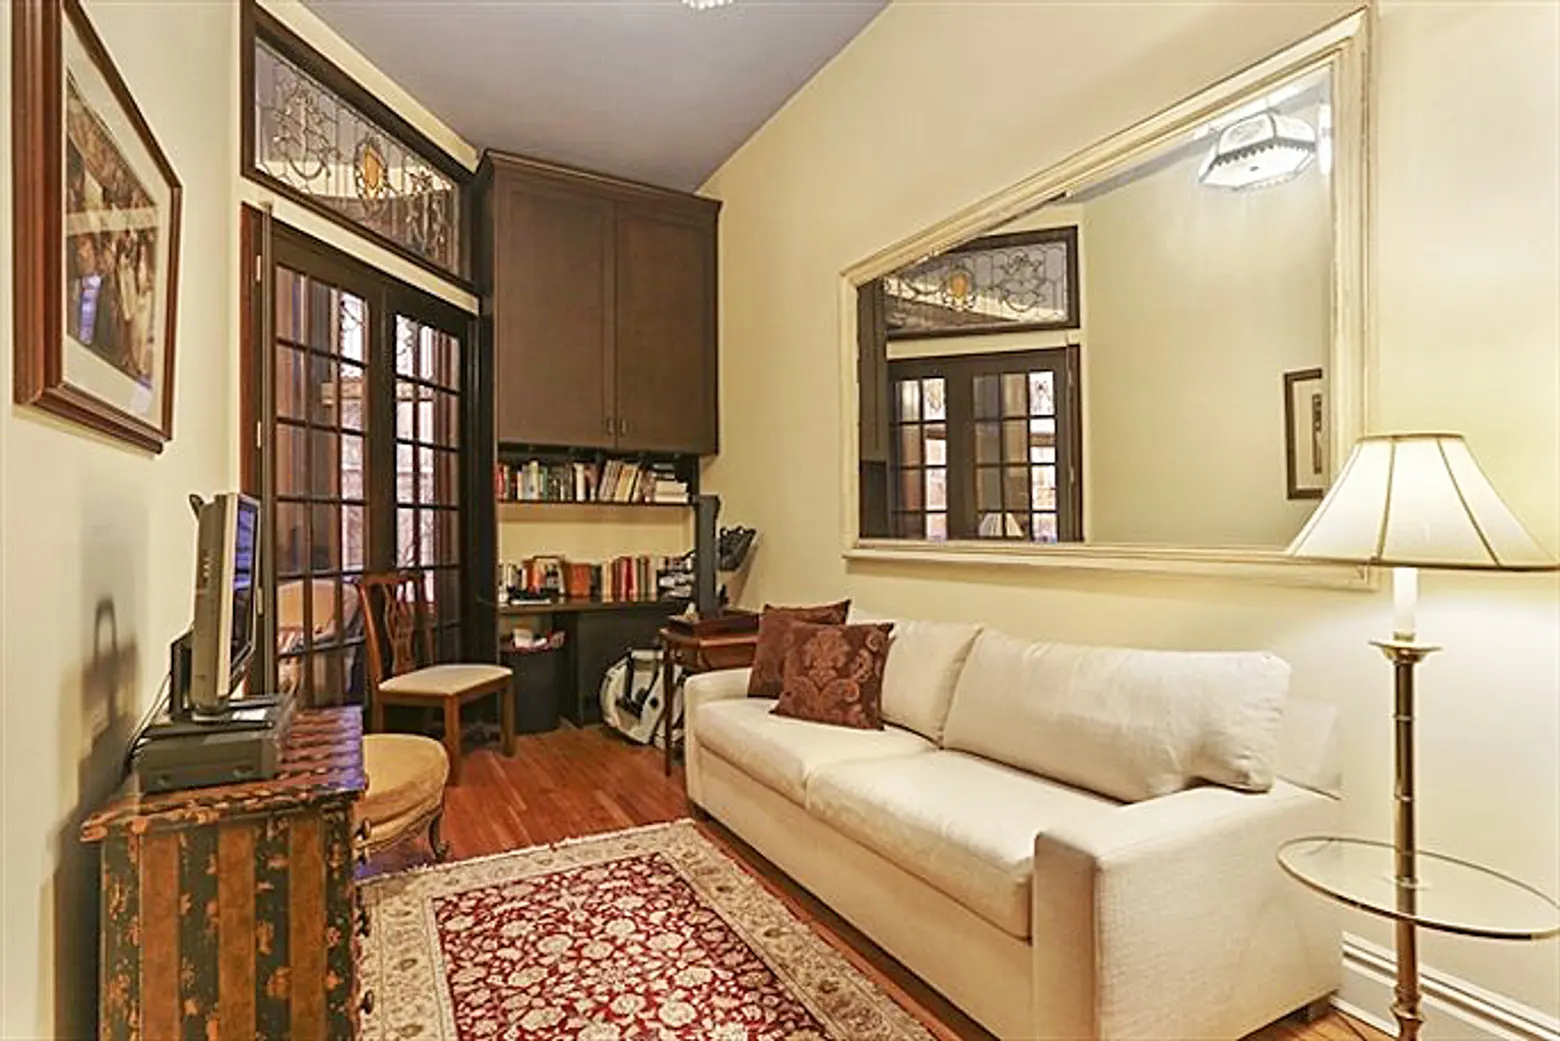 Make Central Park Your Neighbor with This Adorable $2.6M Townhouse Apartment